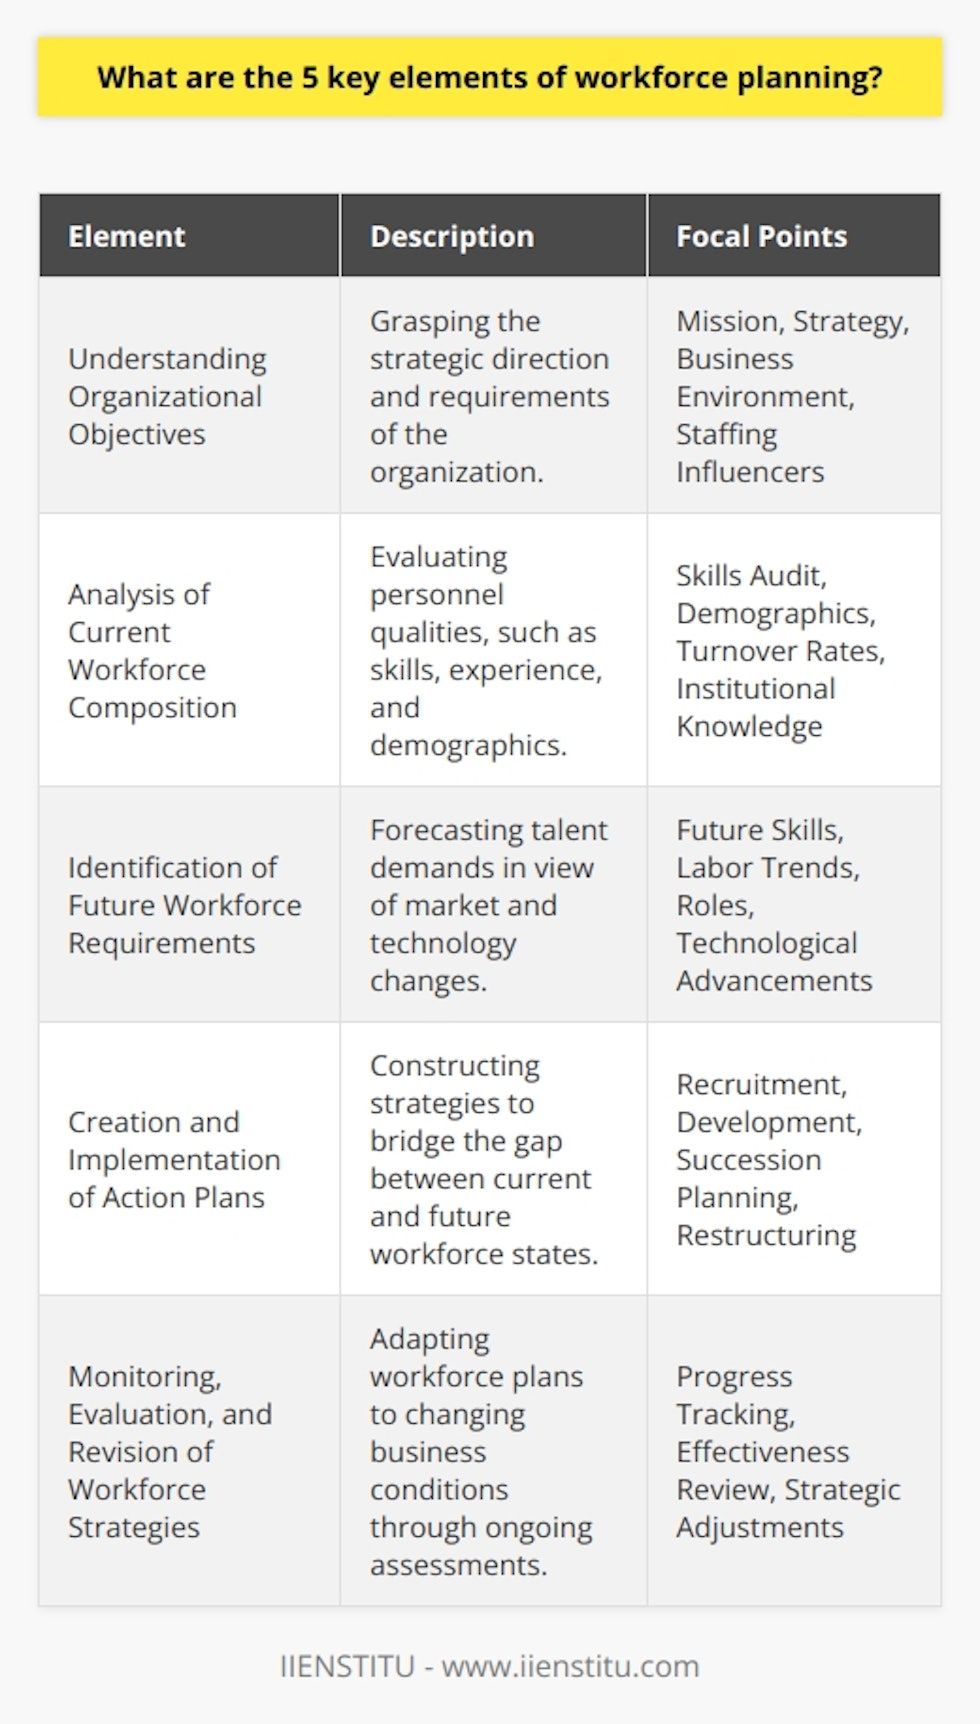 Workforce planning is a systematic approach aimed at aligning the needs and priorities of an organization with those of its workforce to ensure it can meet its legislative, regulatory, service, and production requirements. It is critical for achieving optimal organizational performance and can be the difference between a thriving company and one that struggles to manage its human capital effectively. There are five key elements of workforce planning that are vital to its success.**Understanding Organizational Objectives**The foundation of effective workforce planning is a deep understanding of the organization's strategic objectives. Before a company can begin planning its workforce needs, it must have a clear grasp of the direction in which it is headed. This includes understanding the current and future business environment, organizational mission, strategic goals, and the various factors that could influence staffing requirements.**Analysis of Current Workforce Composition**Analyzing the existing workforce is a complex process that goes beyond numbers. It comprises evaluating the skills, experiences, and demographics of the current employee base. This analysis should identify the strengths, weaknesses, and the age and career stage of employees, acknowledging workforce turnover rates, and the impact of retirements and resignations on institutional knowledge and leadership continuity.**Identification of Future Workforce Requirements**Identifying what the future workforce should look like is a challenge that requires forecasting talent needs against the backdrop of an unpredictable marketplace. This element of workforce planning attempts to predict which skills, jobs, and roles will be needed in the future based on existing data, labor market trends, technological advancements, and potential retirements. It's about understanding the critical competencies that will drive future business success.**Creation and Implementation of Action Plans**Once an organization has a clear understanding of its future workforce requirements, it needs to build a strategy to bridge the gap between the current and future state. Here, the focus is on creating and executing action plans which could involve recruitment, development, succession planning, and workforce restructuring. This is where the organization translates its workforce understanding into actionable initiatives.**Monitoring, Evaluation, and Revision of Workforce Strategies**The business landscape is constantly changing, and workforce plans must adapt accordingly. The fifth key element of workforce planning is establishing systems for monitoring, evaluating, and revising workforce strategies. This involves tracking progress against workforce planning targets, assessing the effectiveness of implemented initiatives, and making necessary adjustments to align with business changes.Effective workforce planning is not a one-time event but an ongoing process that requires constant attention and adjustment. Embracing these five key elements allows an organization to not only prepare for the future but to also build a resilient and adaptable workforce capable of exceeding business goals. Through thoughtful workforce planning, organizations can face the challenges of talent management in today's dynamic workplace environment with confidence.